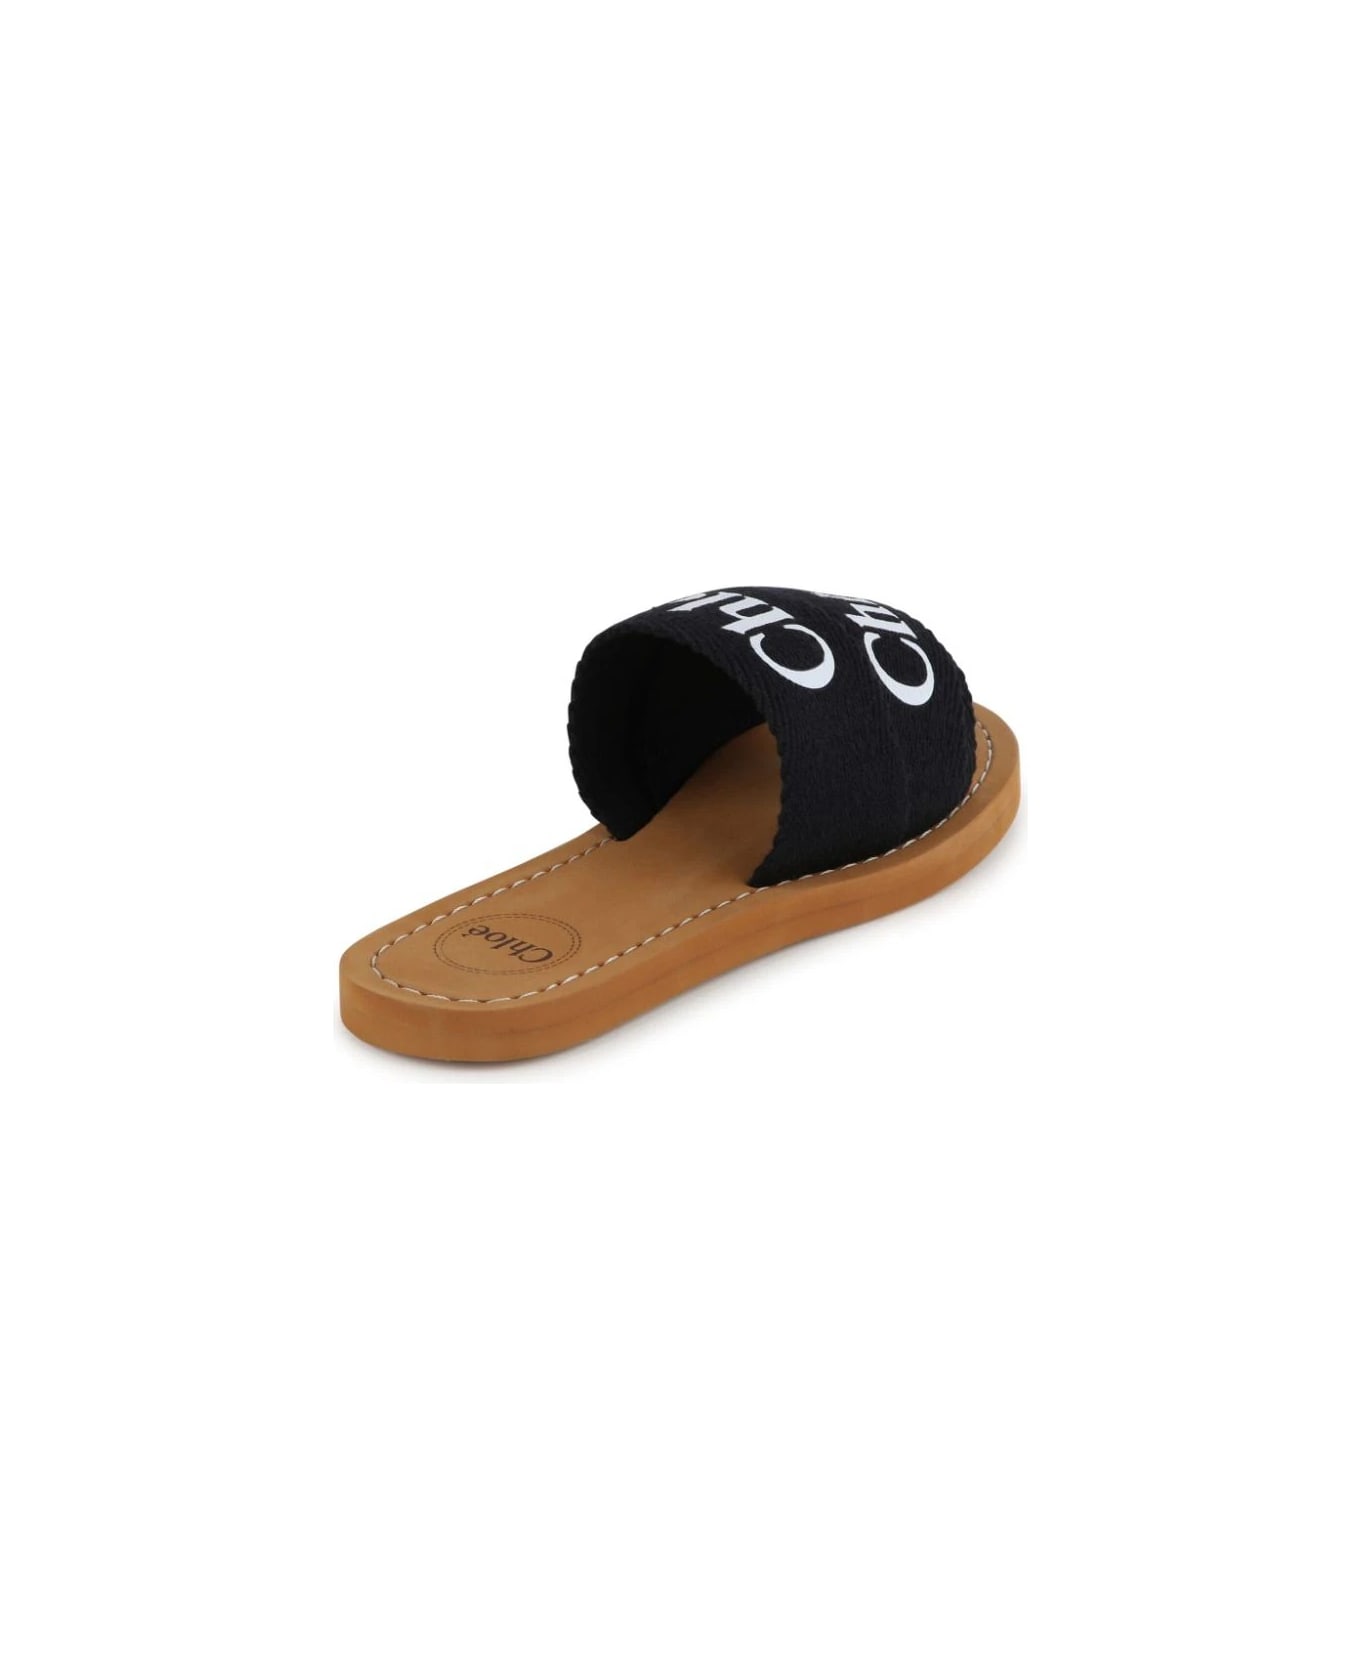 Chloé Woody Sandals In Black Canvas With Logo - Black シューズ